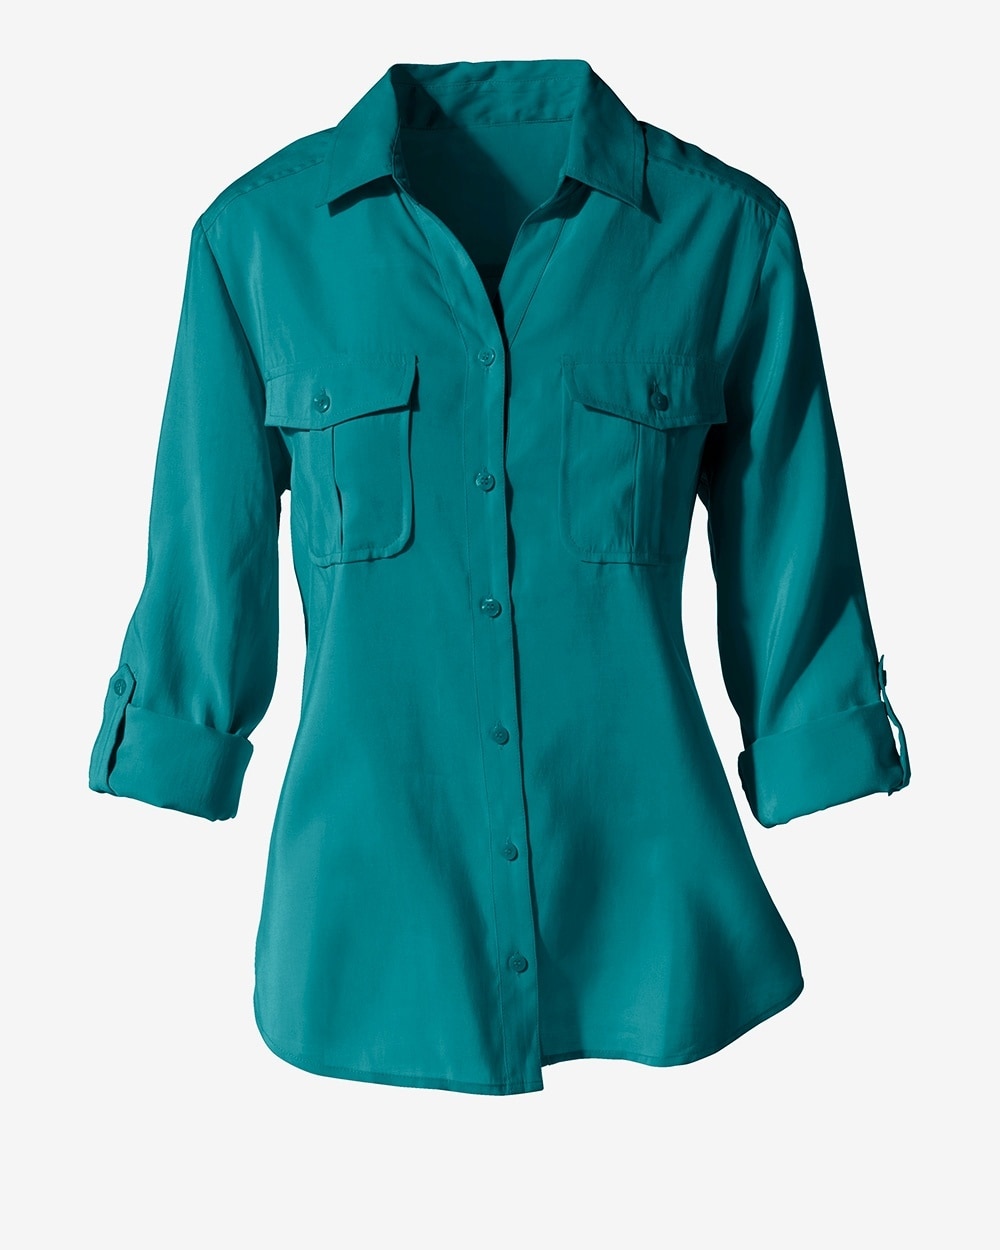 The Silky Chic Shirt Refined Teal